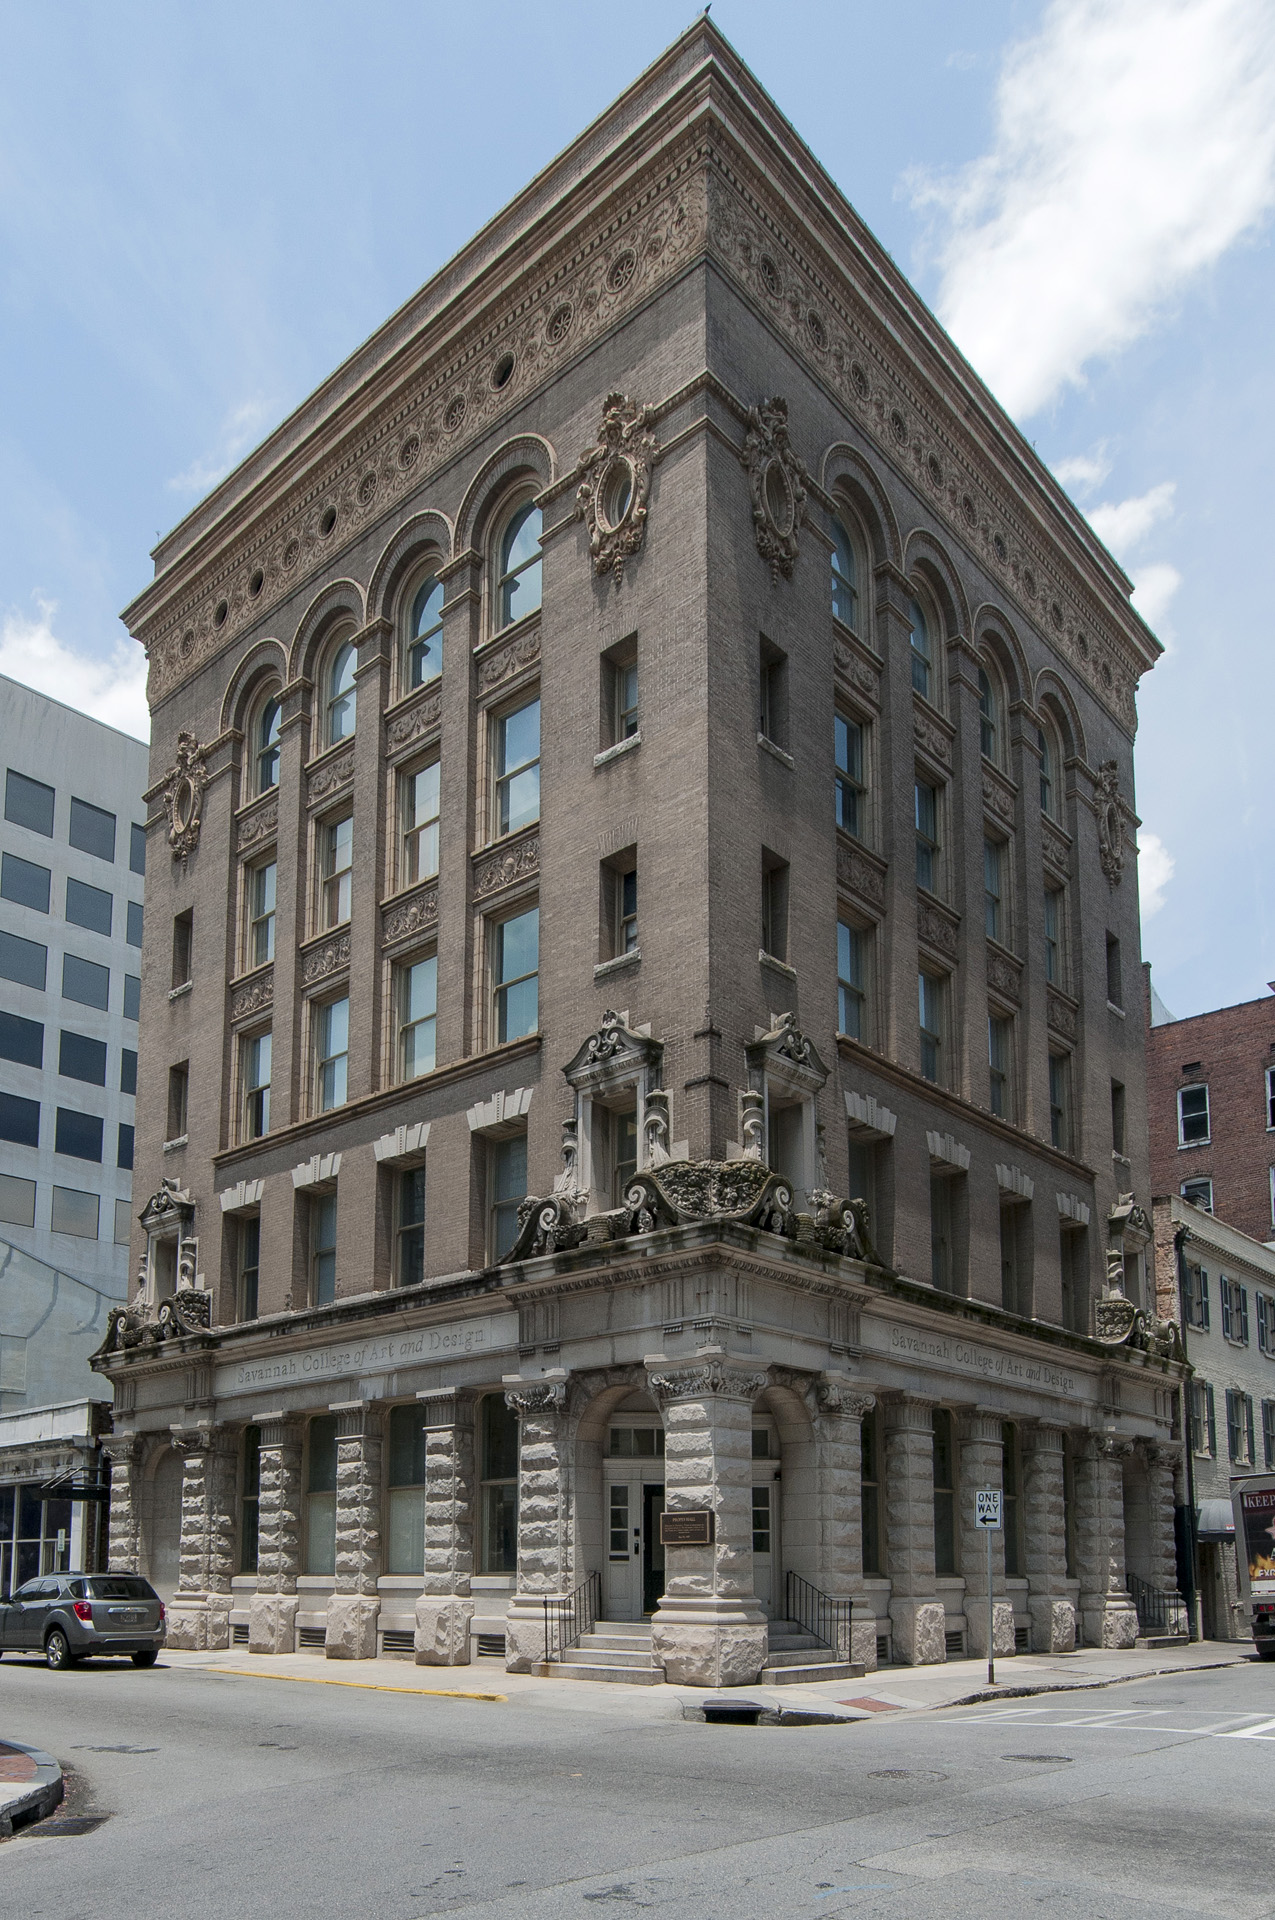 Buildings of Savannah' receives Award of Excellence 